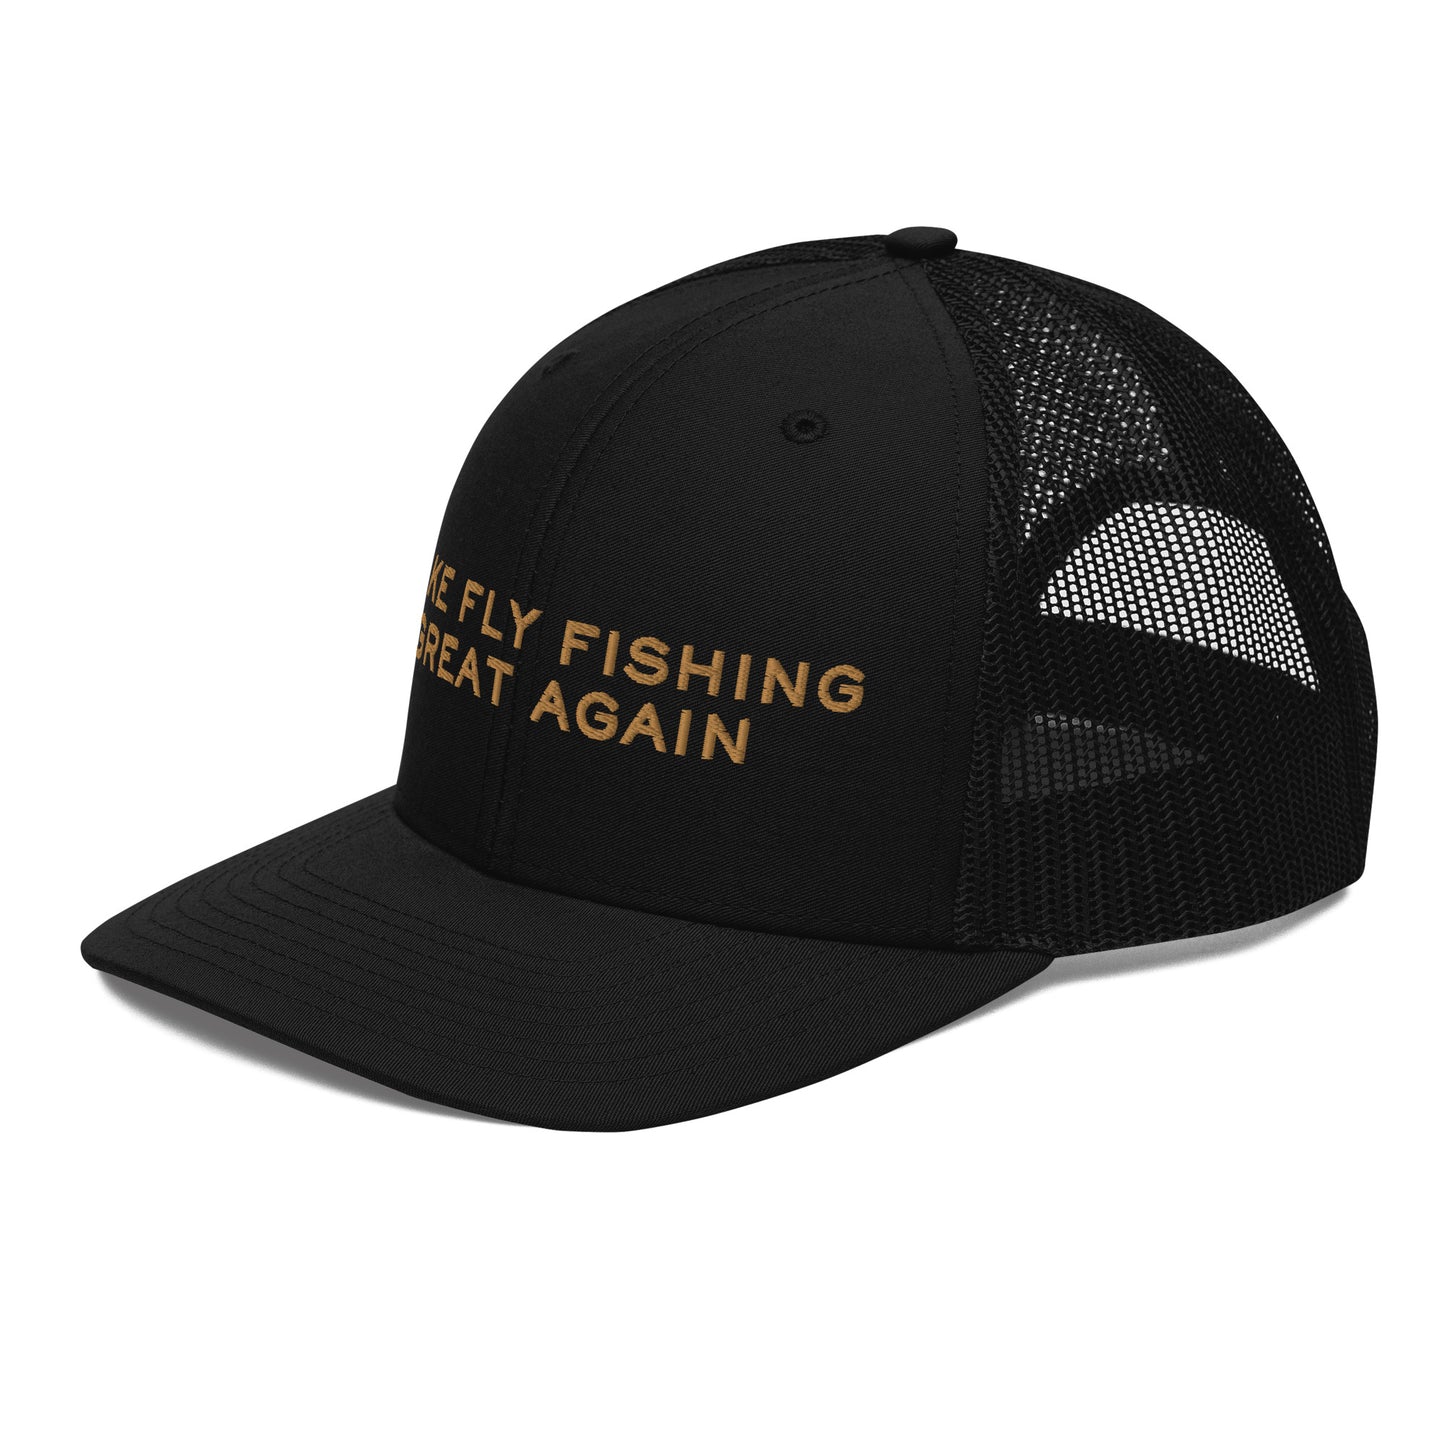 Make Fly Fishing Great Again - Trucker Cap by Olive Outfitters